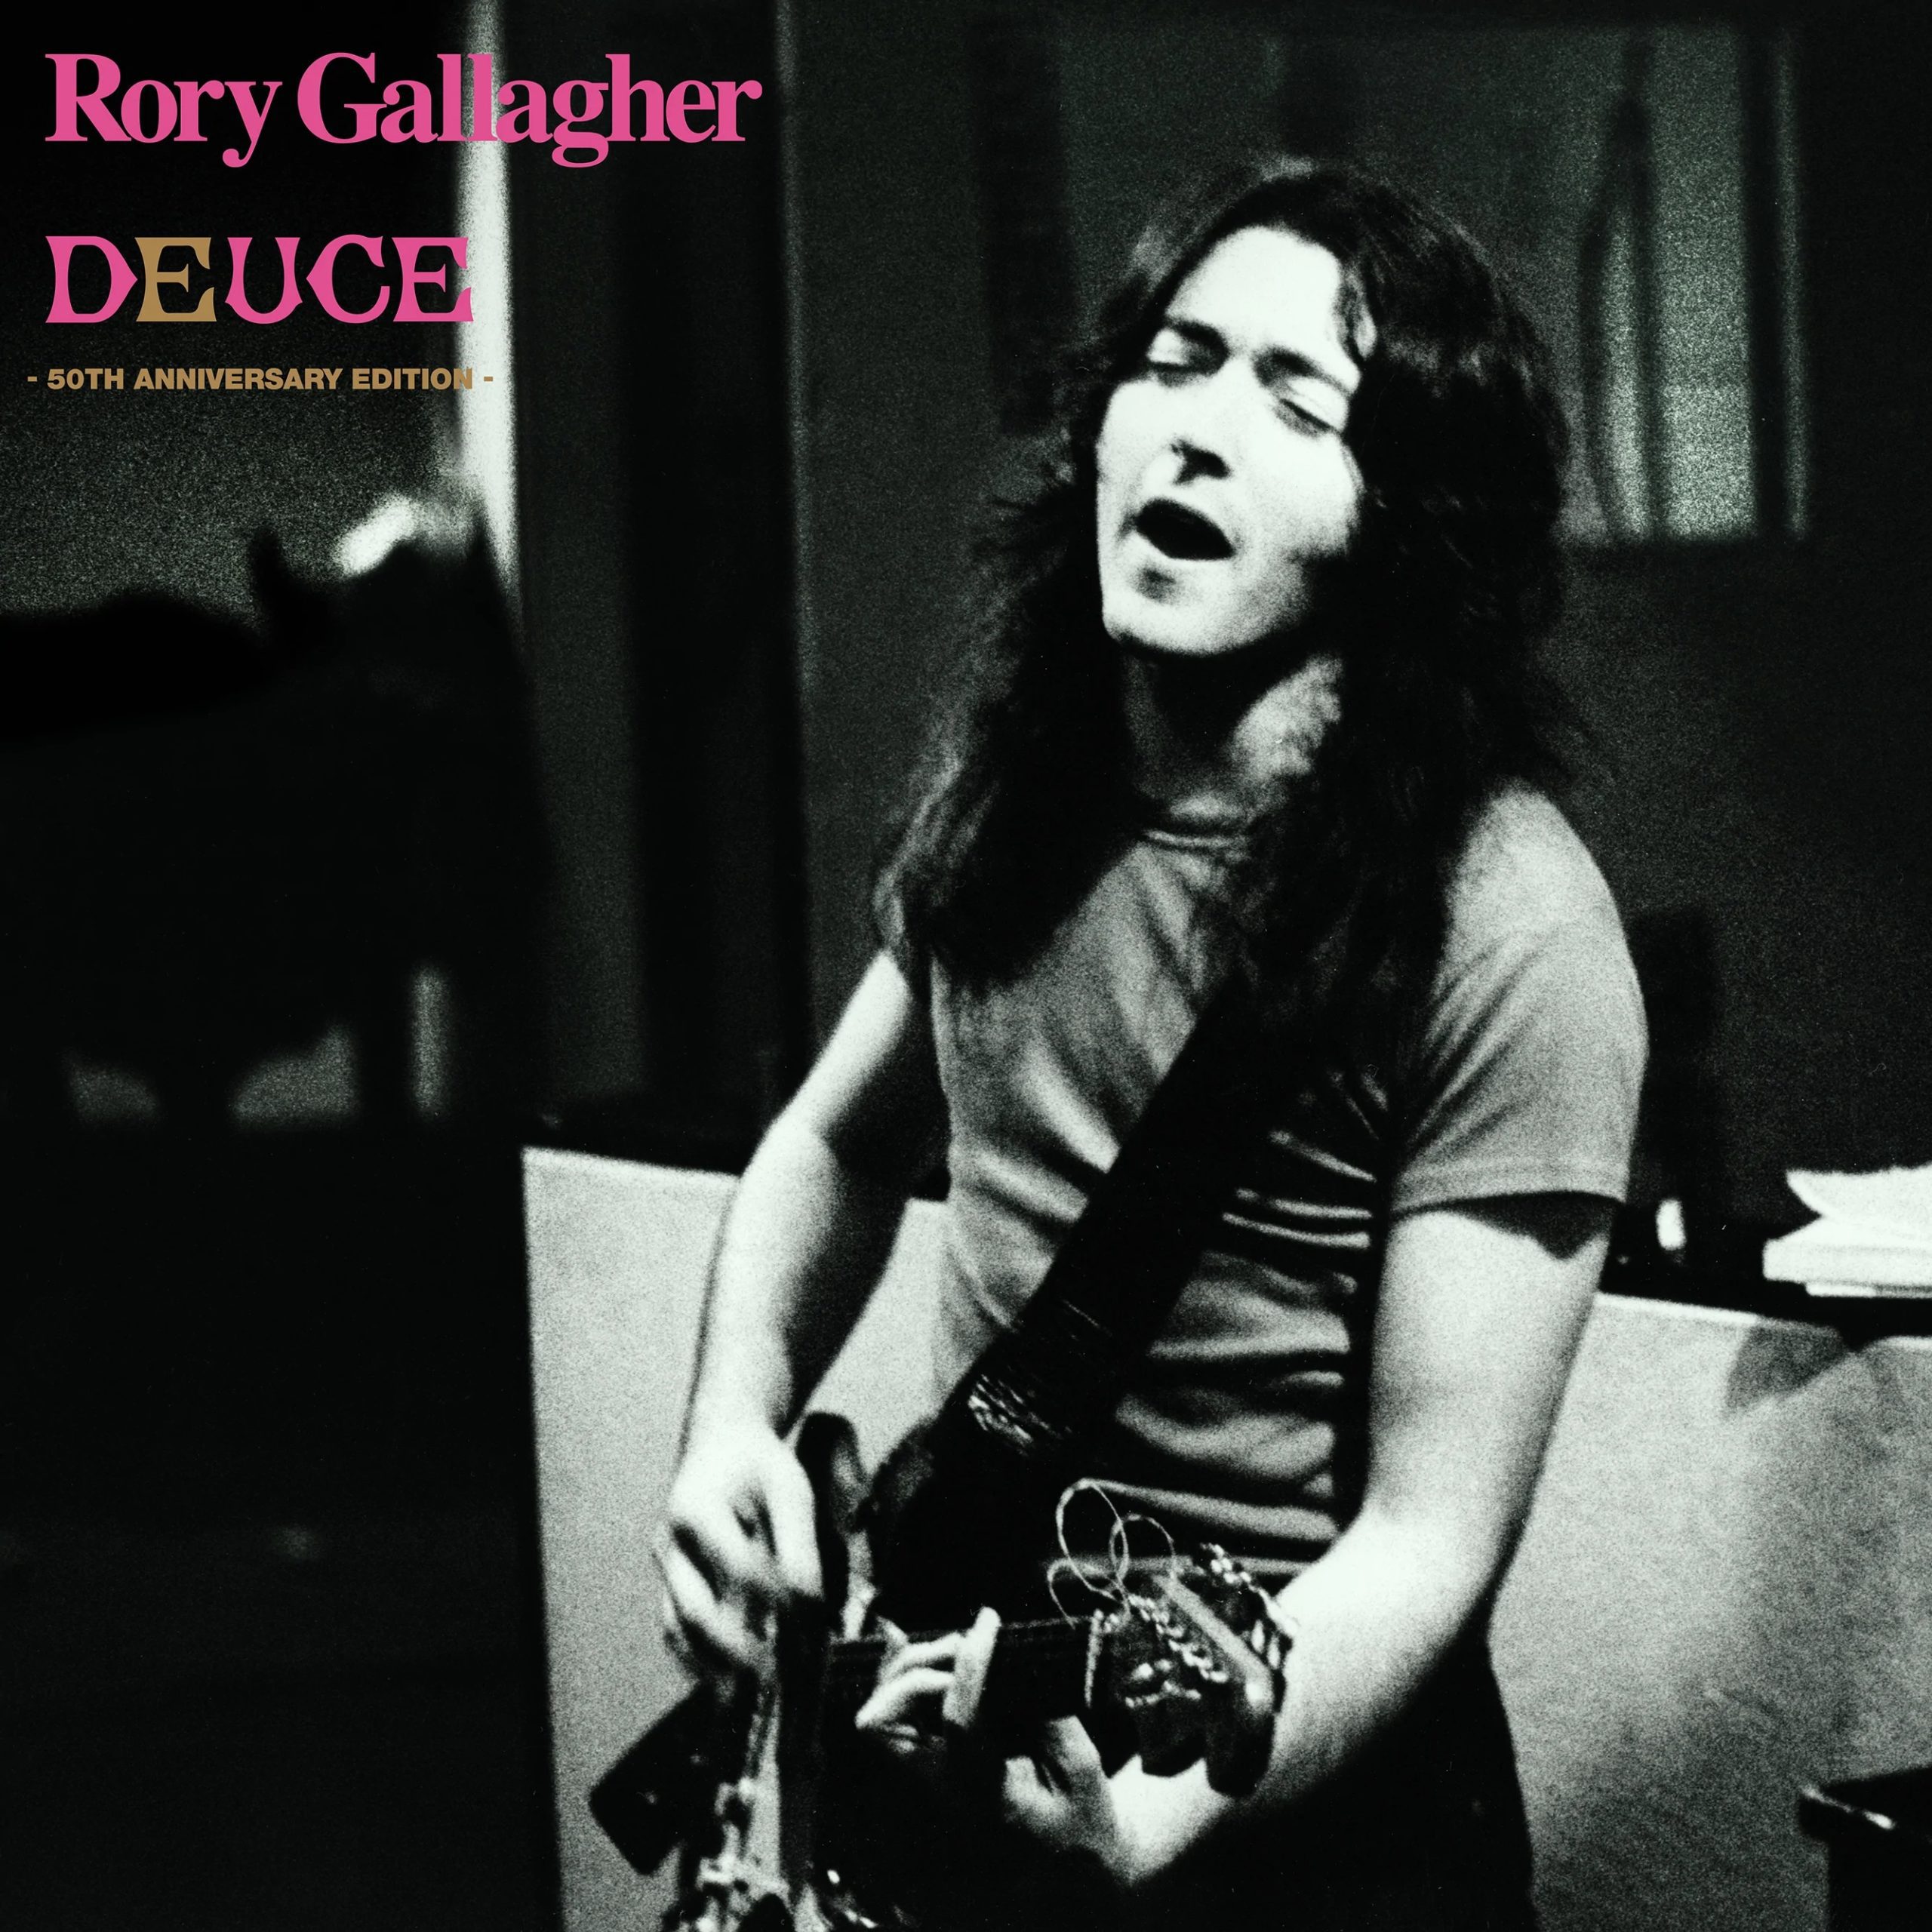 Rory Gallagher – Deuce 50 Anniversary